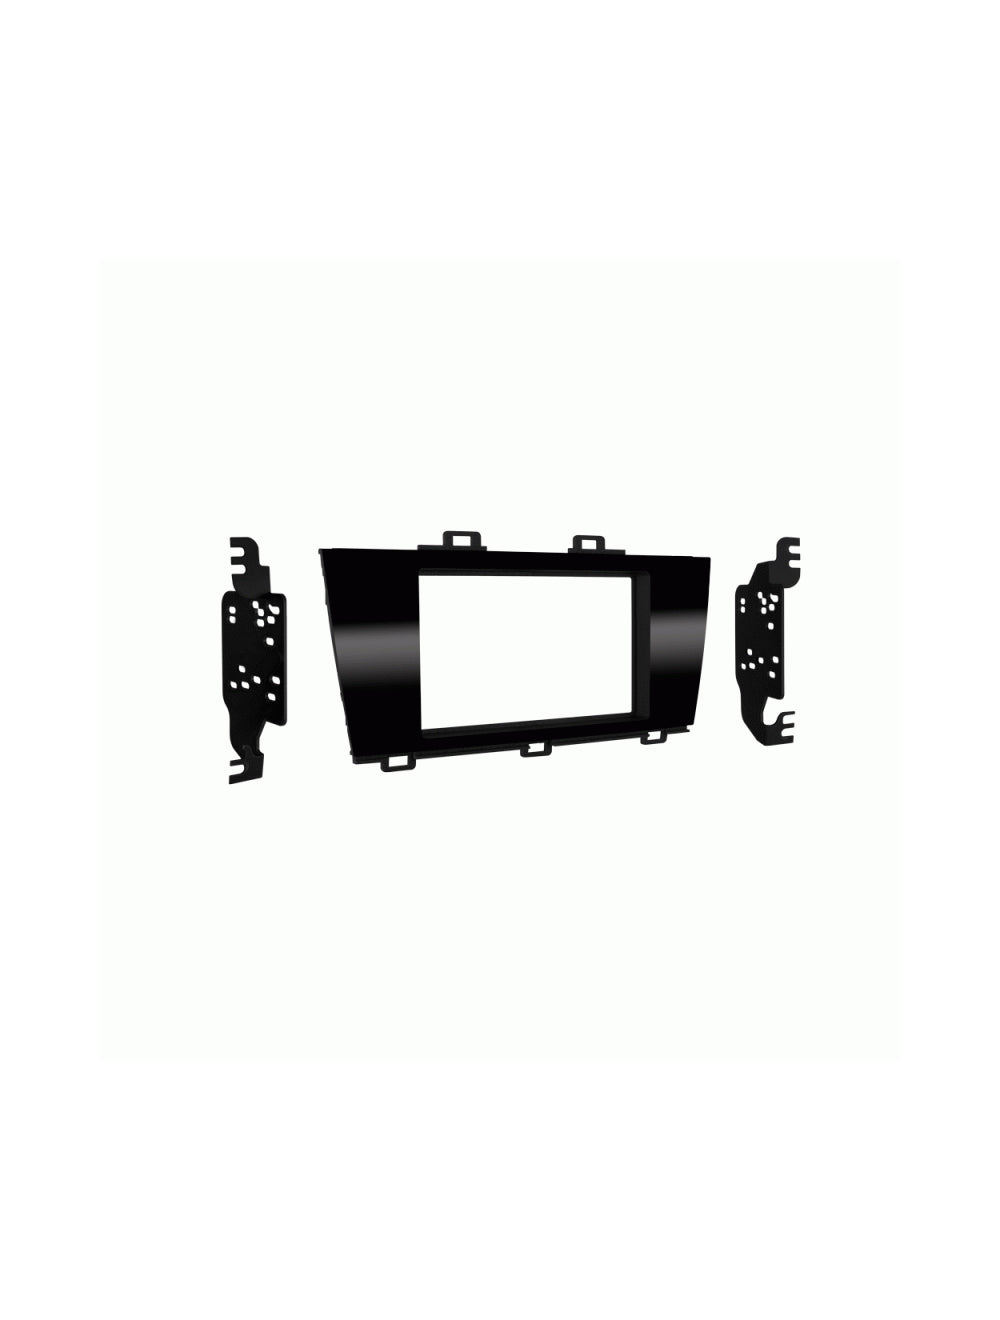 Metra 95-8906HG Double DIN Dash Kit for 2015-UP Subaru Legacy /Outback Black